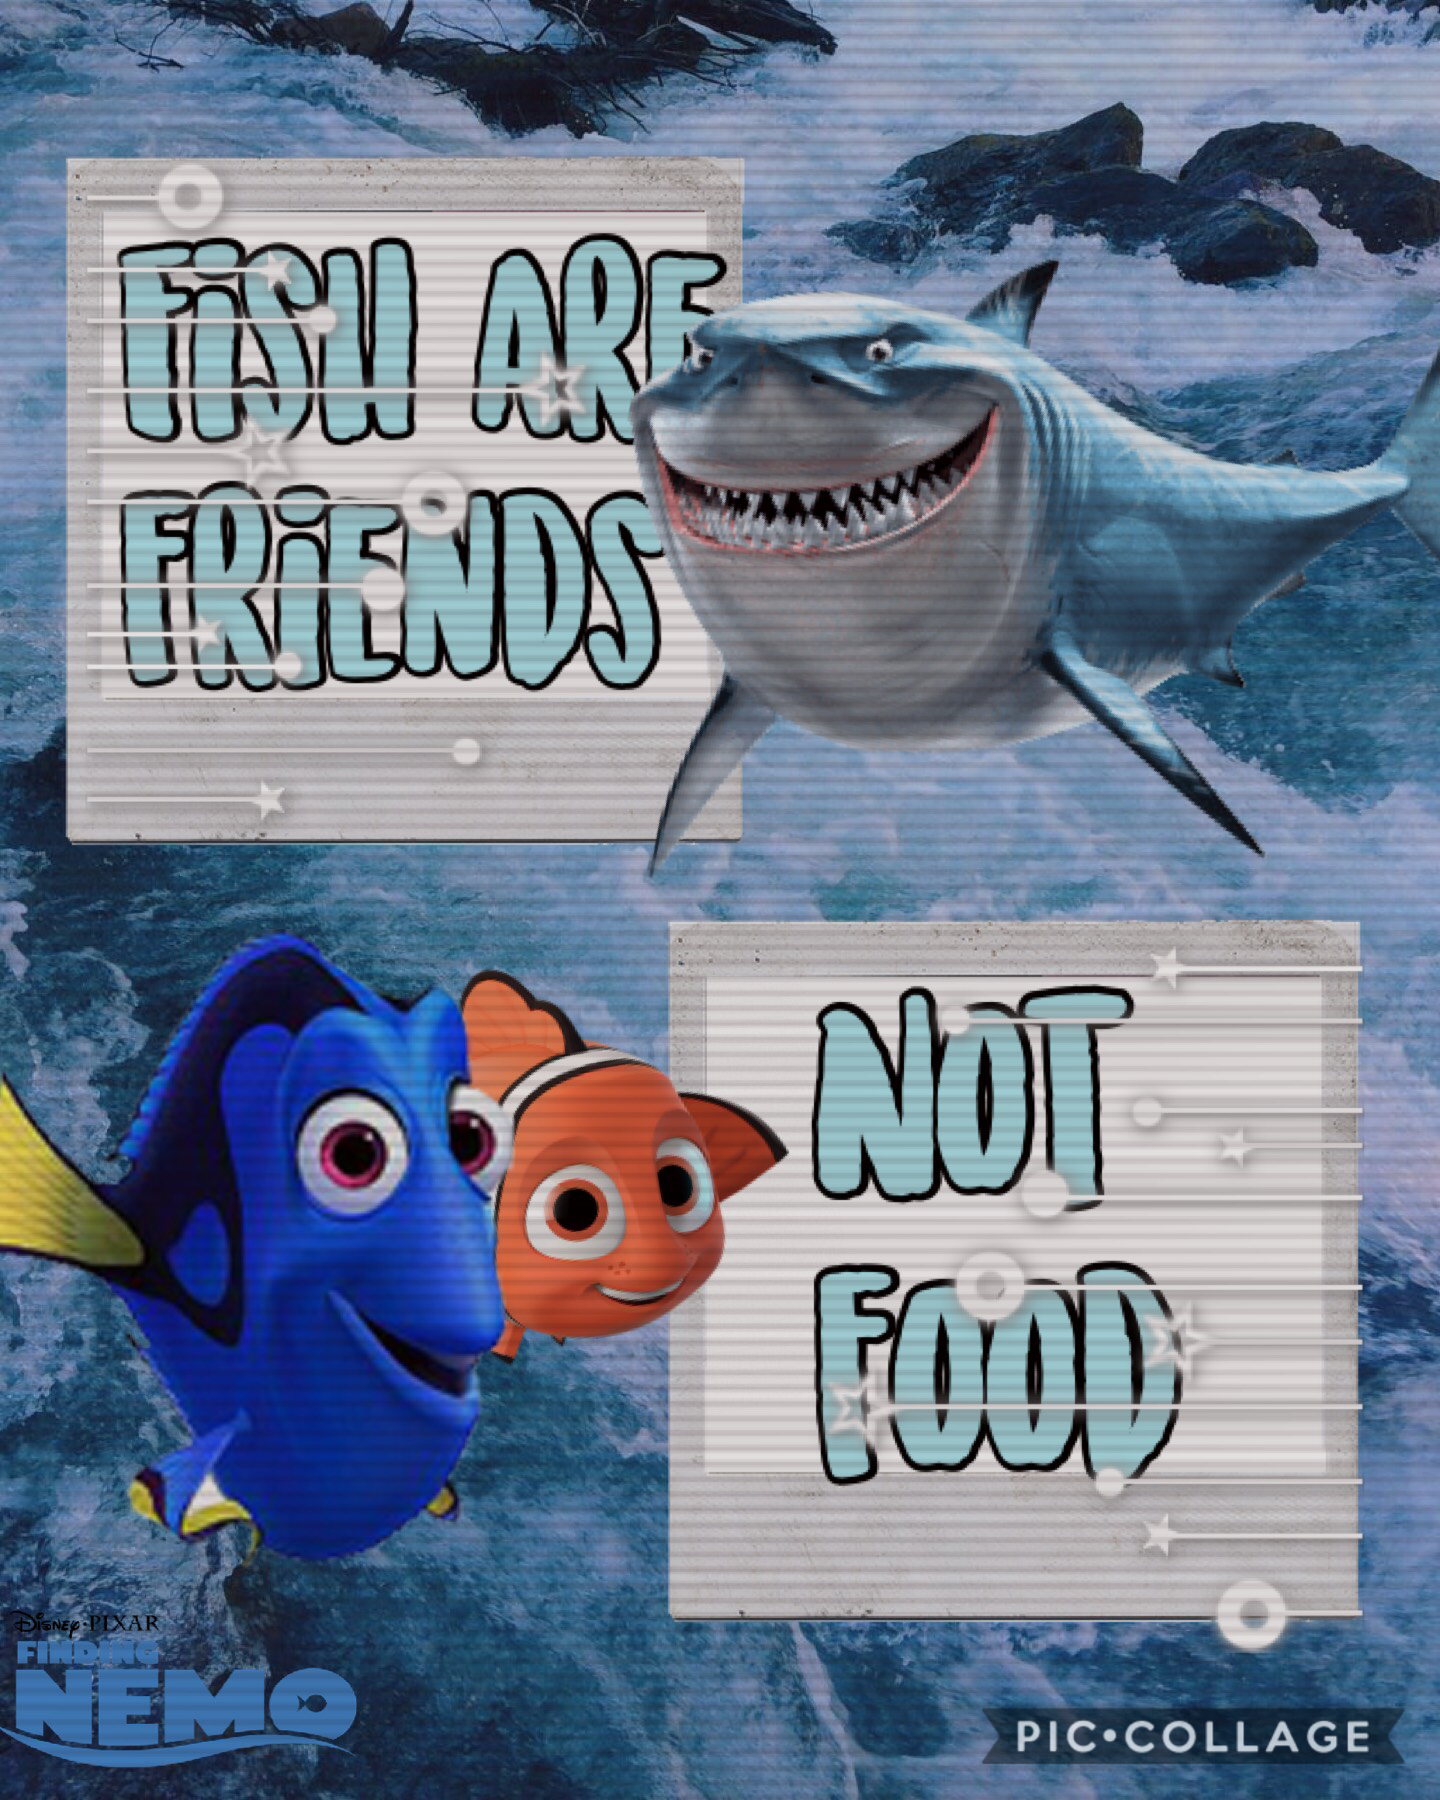 Pixar Post: Finding Nemo!! 🐠🐟🦈 Fish are friends not food! 💙